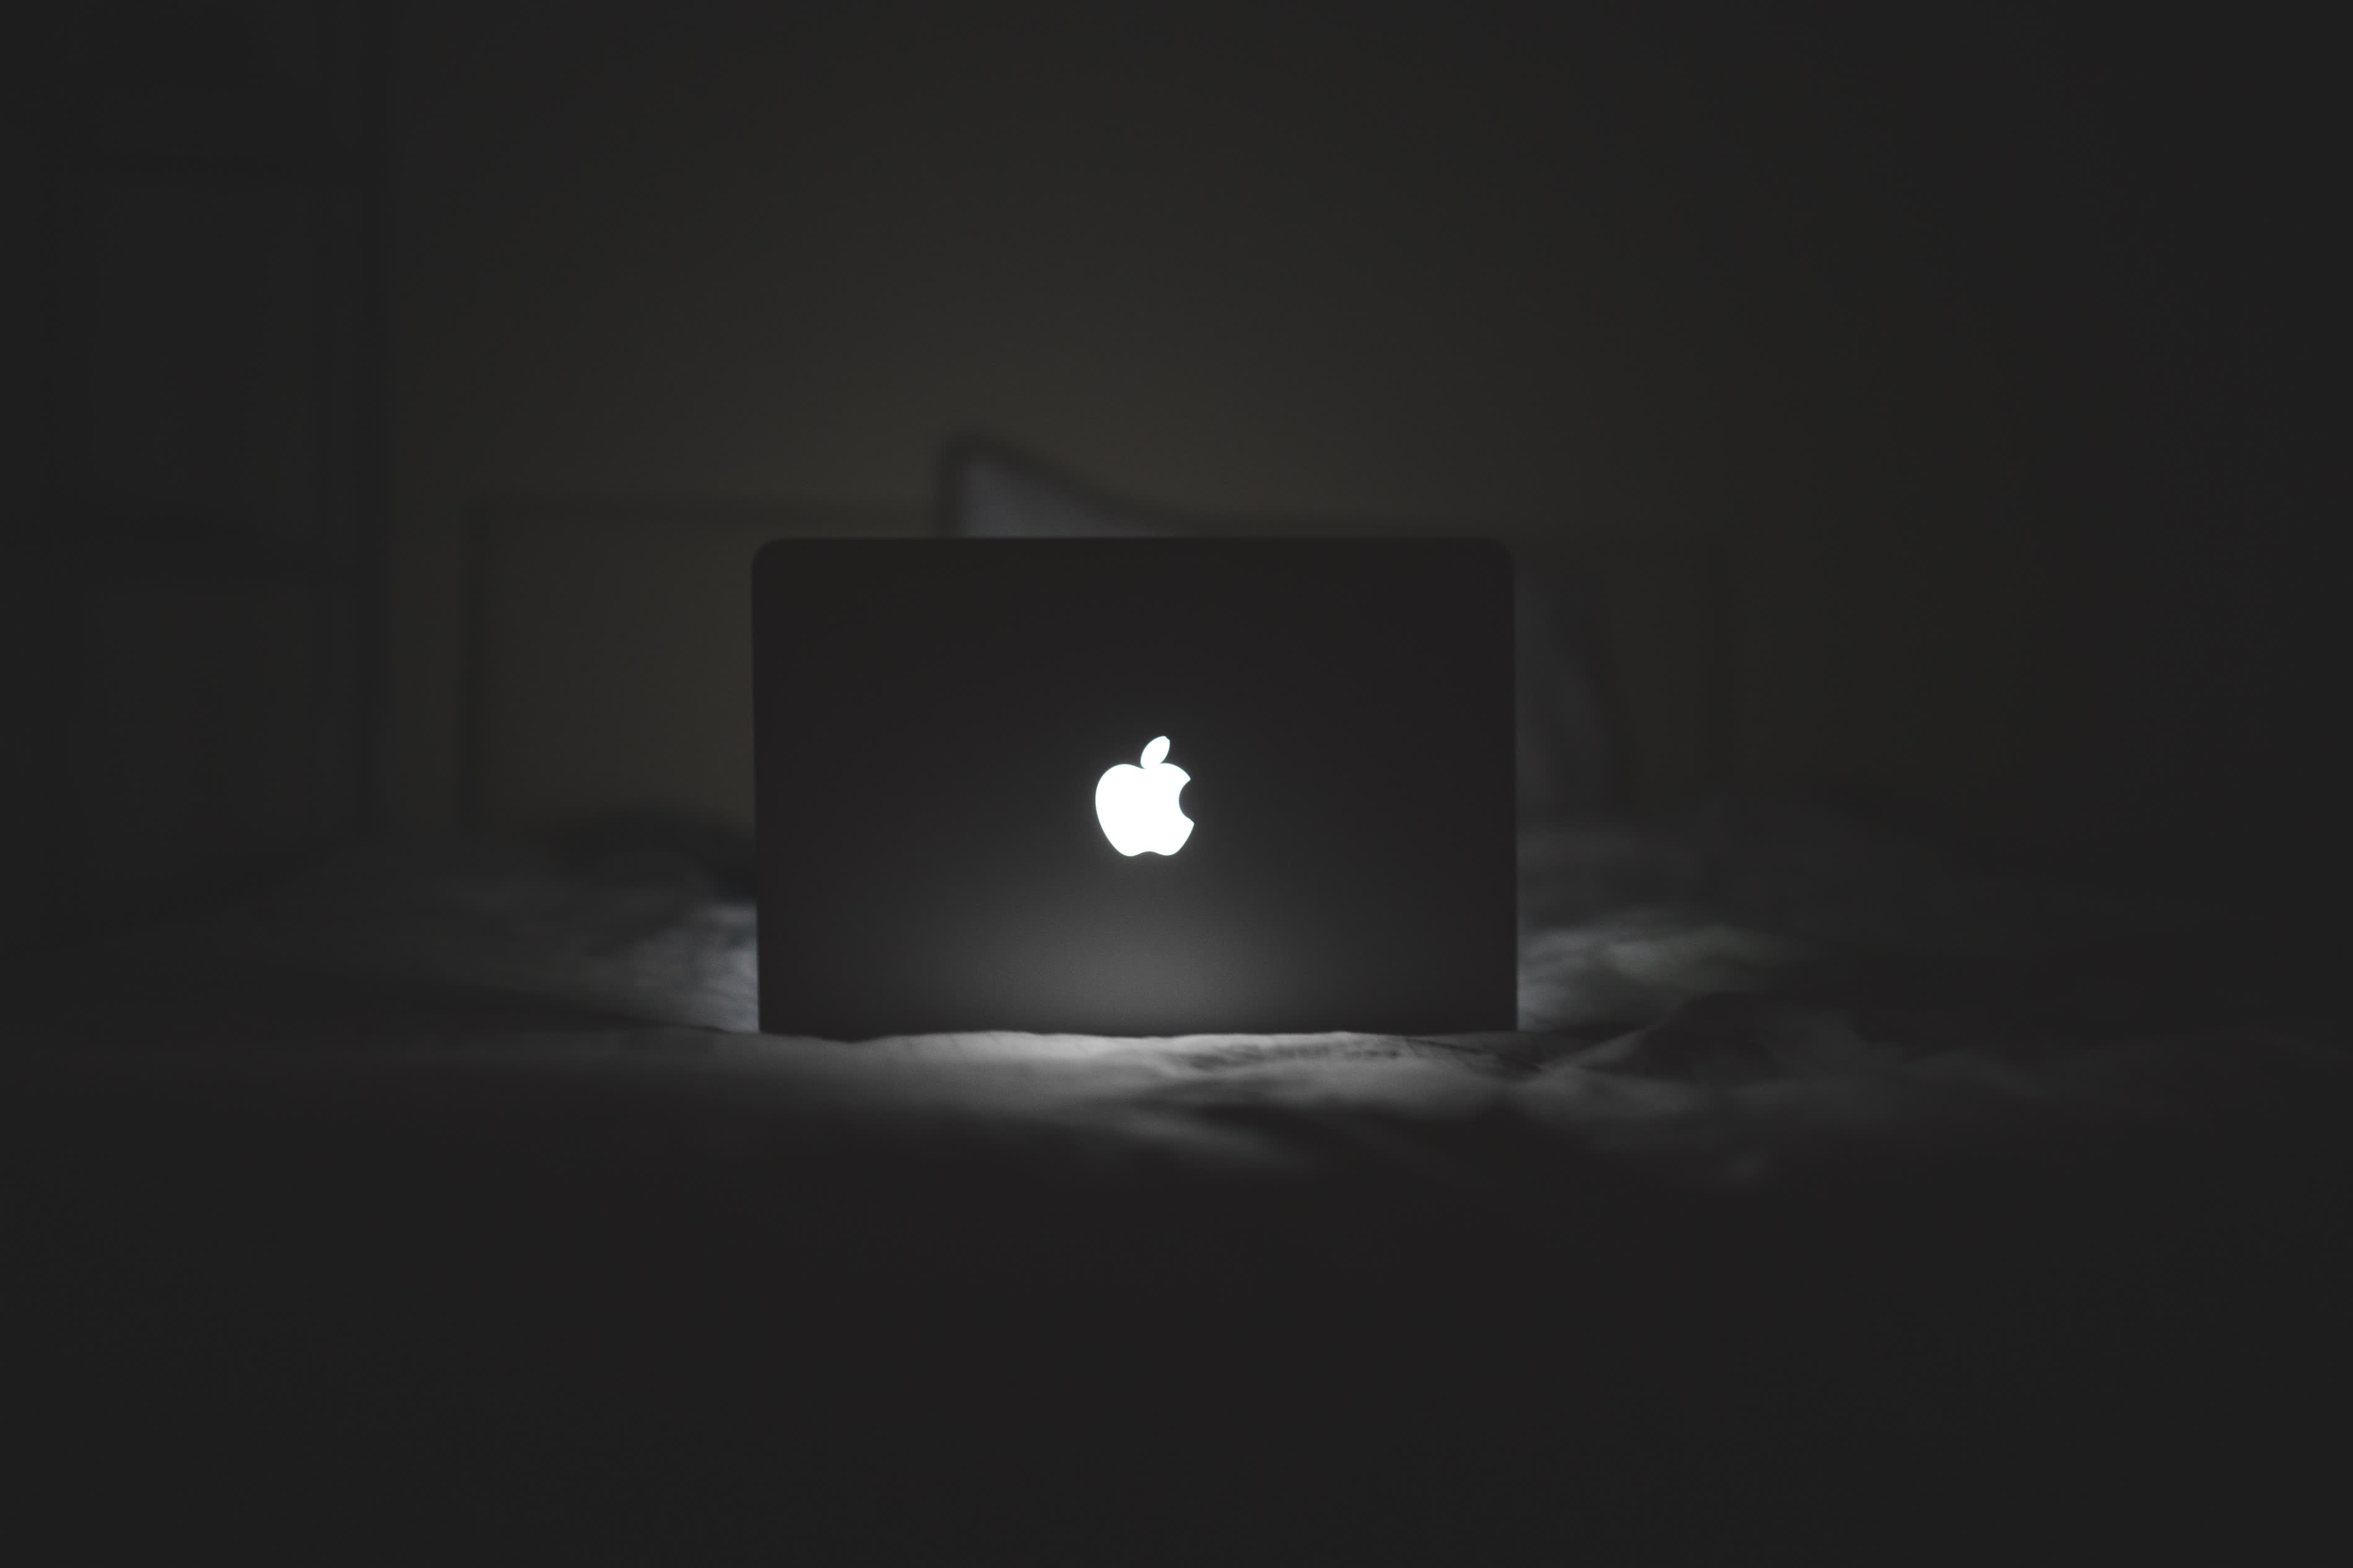 Update your Mac and iOS devices ASAP, Apple just patched actively exploited vulnerabilities